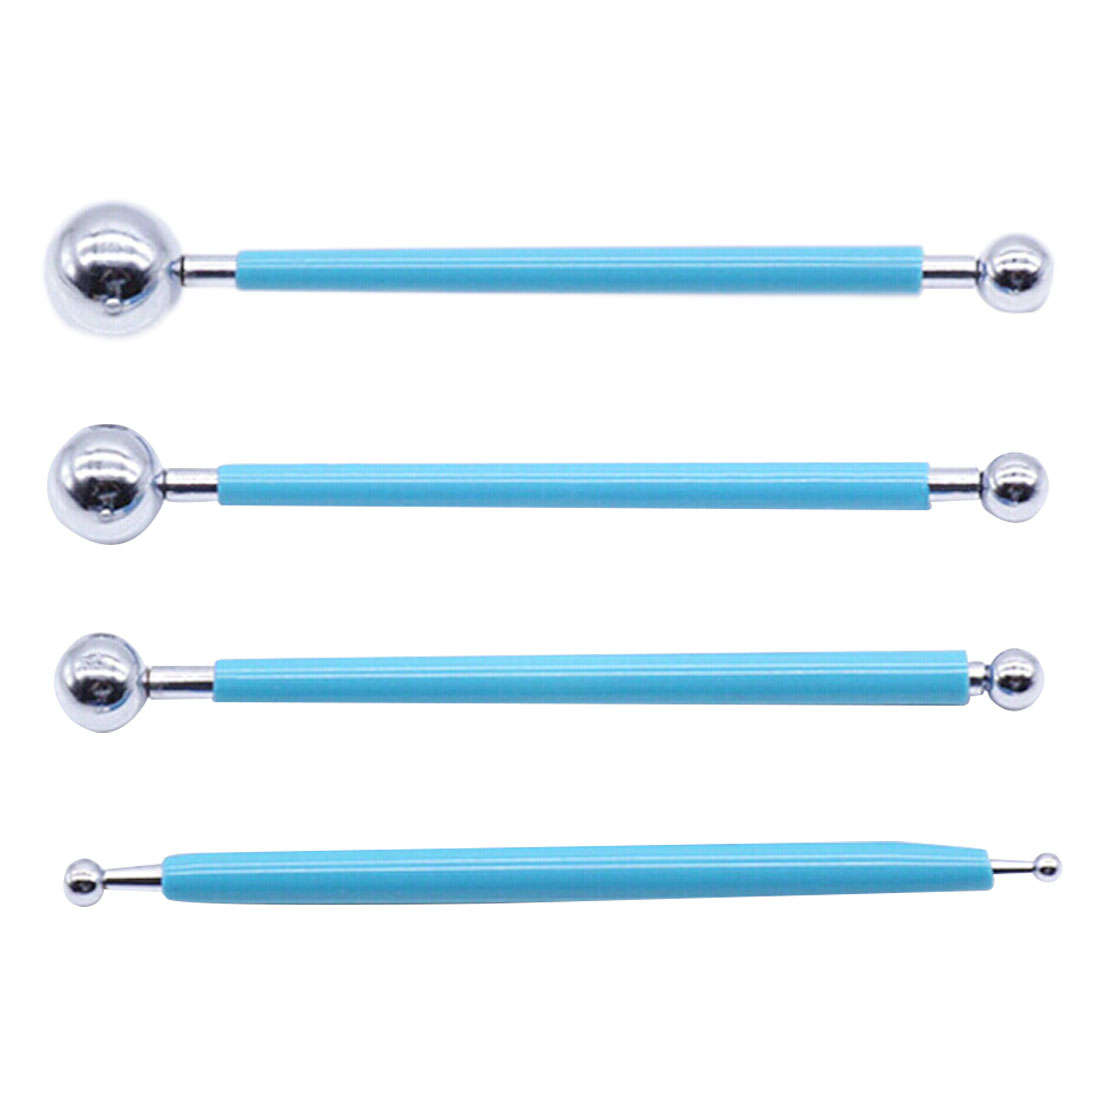 Pottery Clay Dotting Tools DIY Dotting Pen Polymer Clay Modelling Ball Tools Plasticine Pottery Ceramics Sphere Sculpting Tool